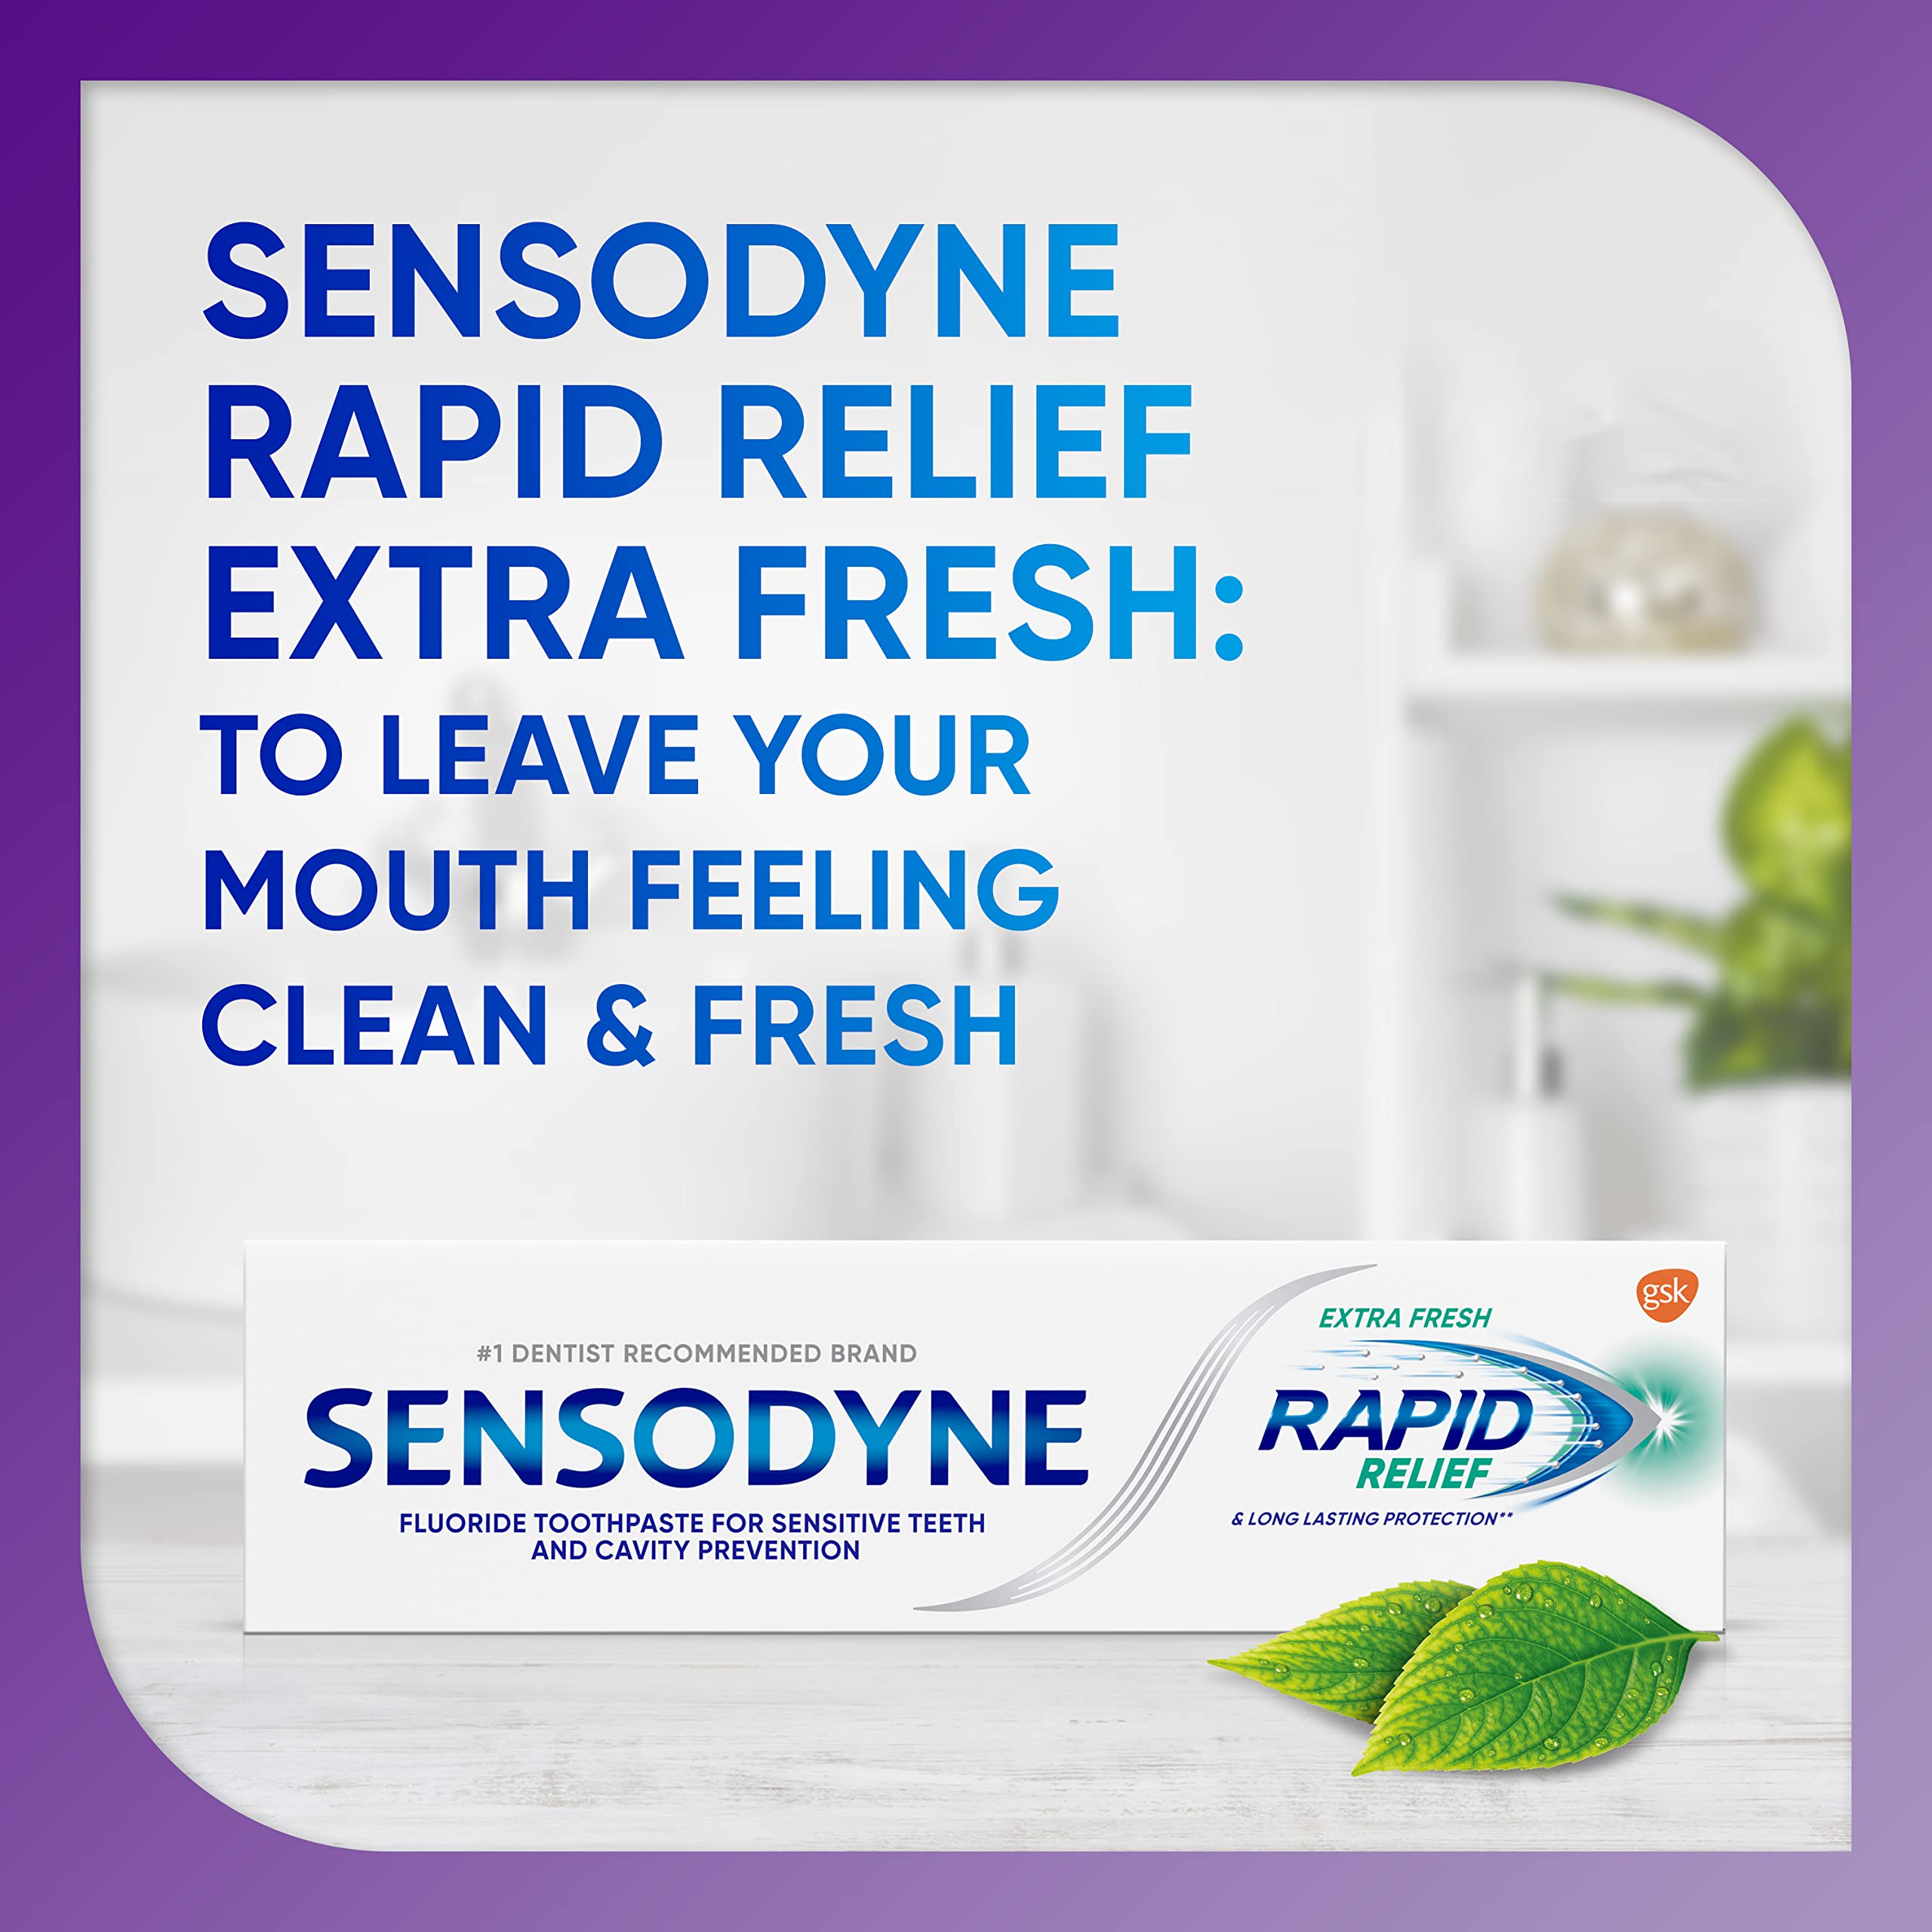 Sensodyne Rapid Relief Sensitive Toothpaste, Extra Fresh - 3.4 Ounces (Pack of 3)